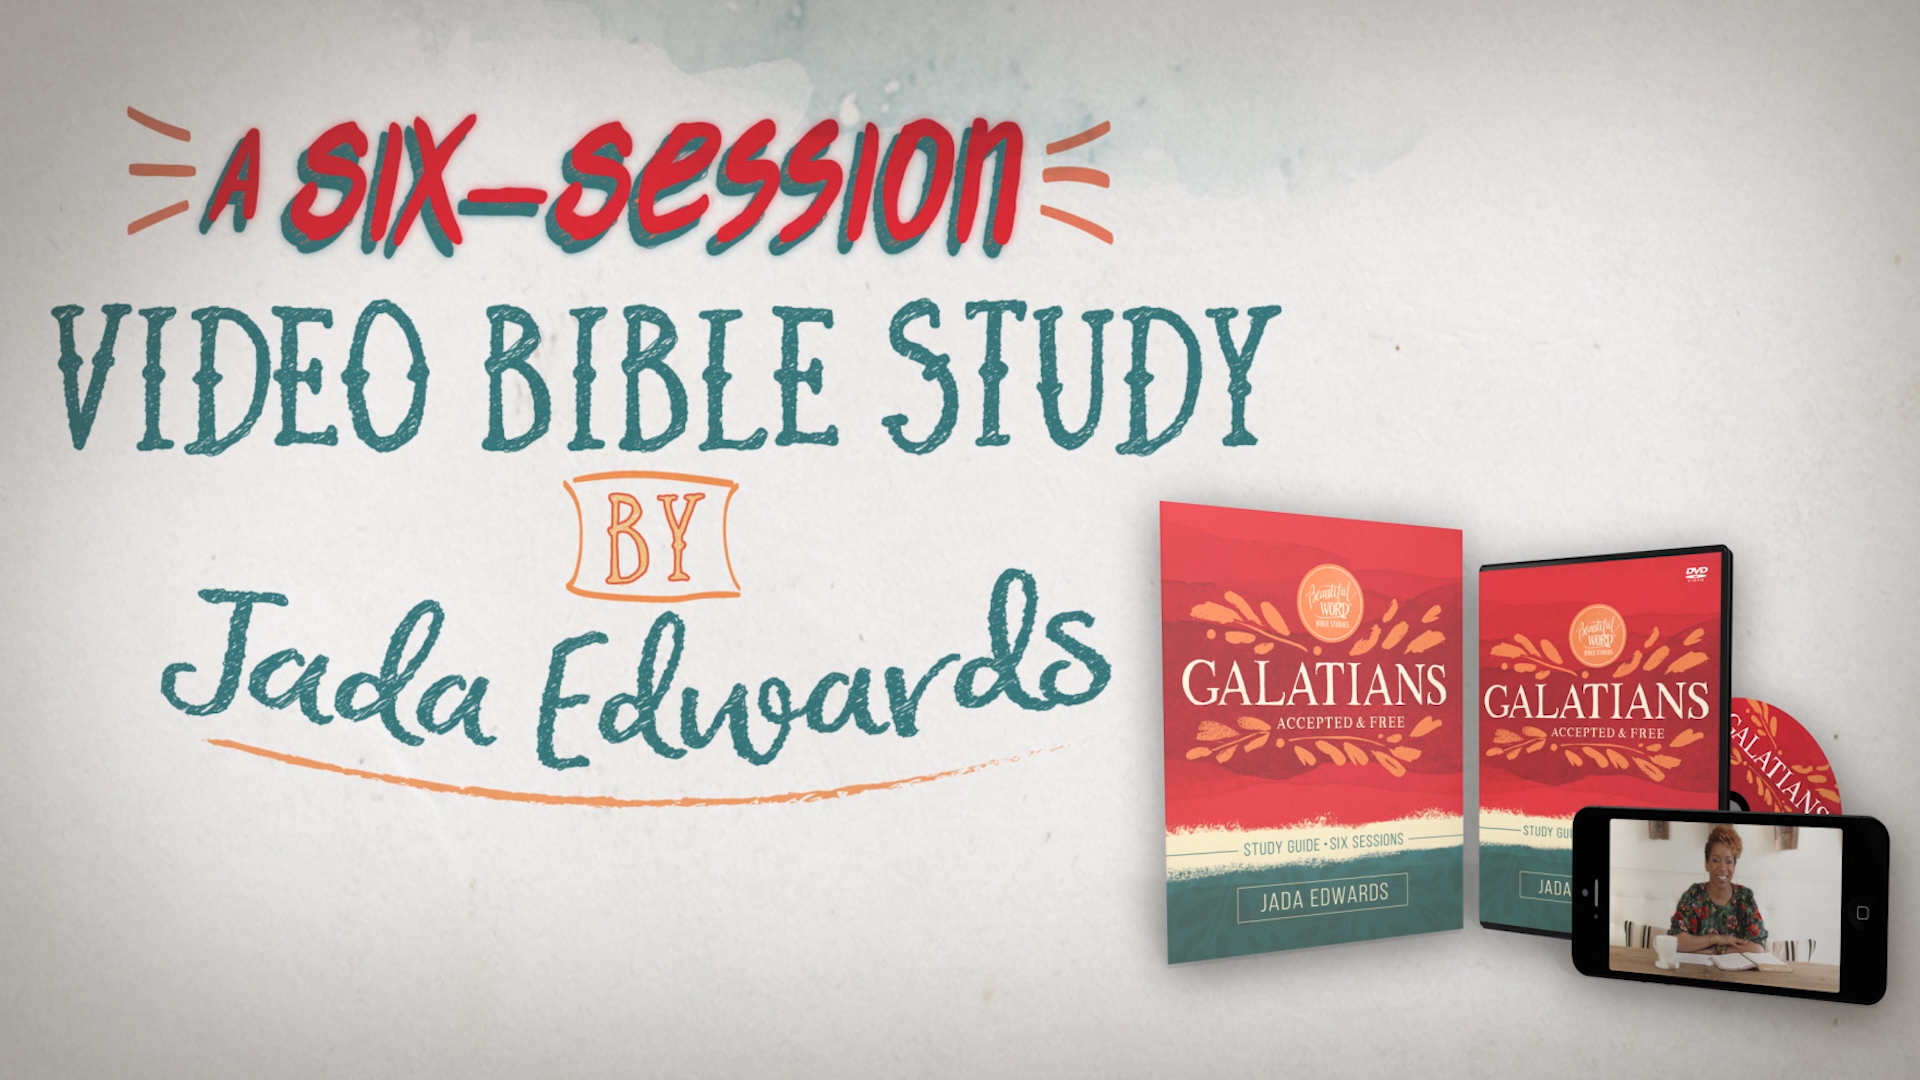 Galatians: Accepted and Free | Jada Edwards